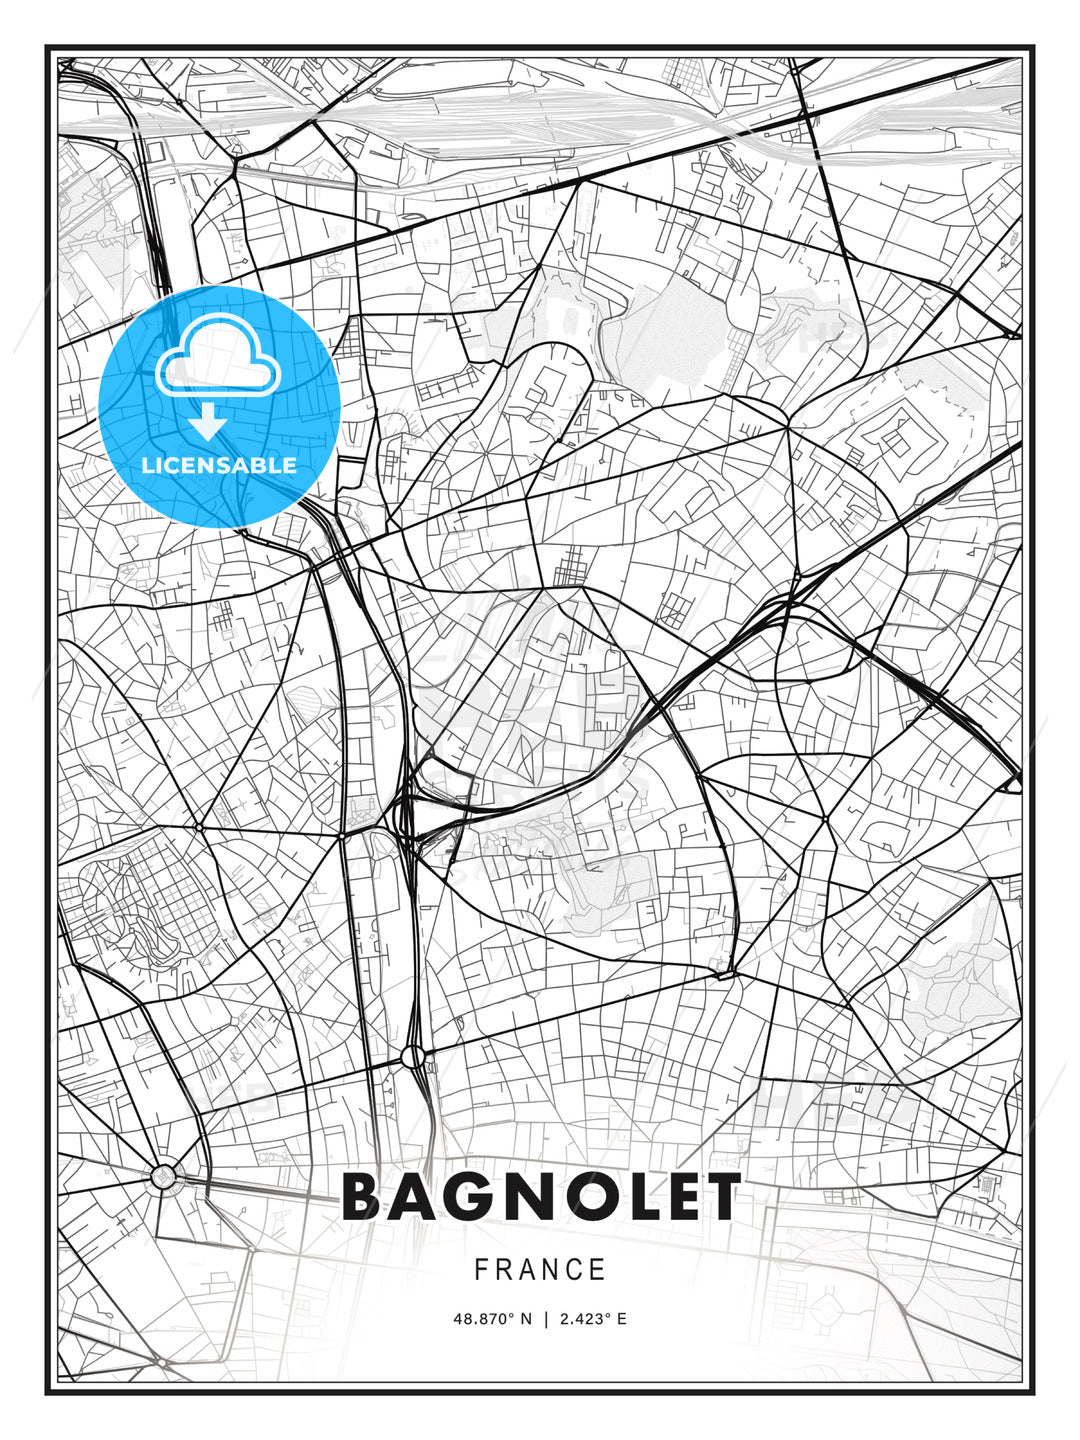 Bagnolet, France, Modern Print Template in Various Formats - HEBSTREITS Sketches